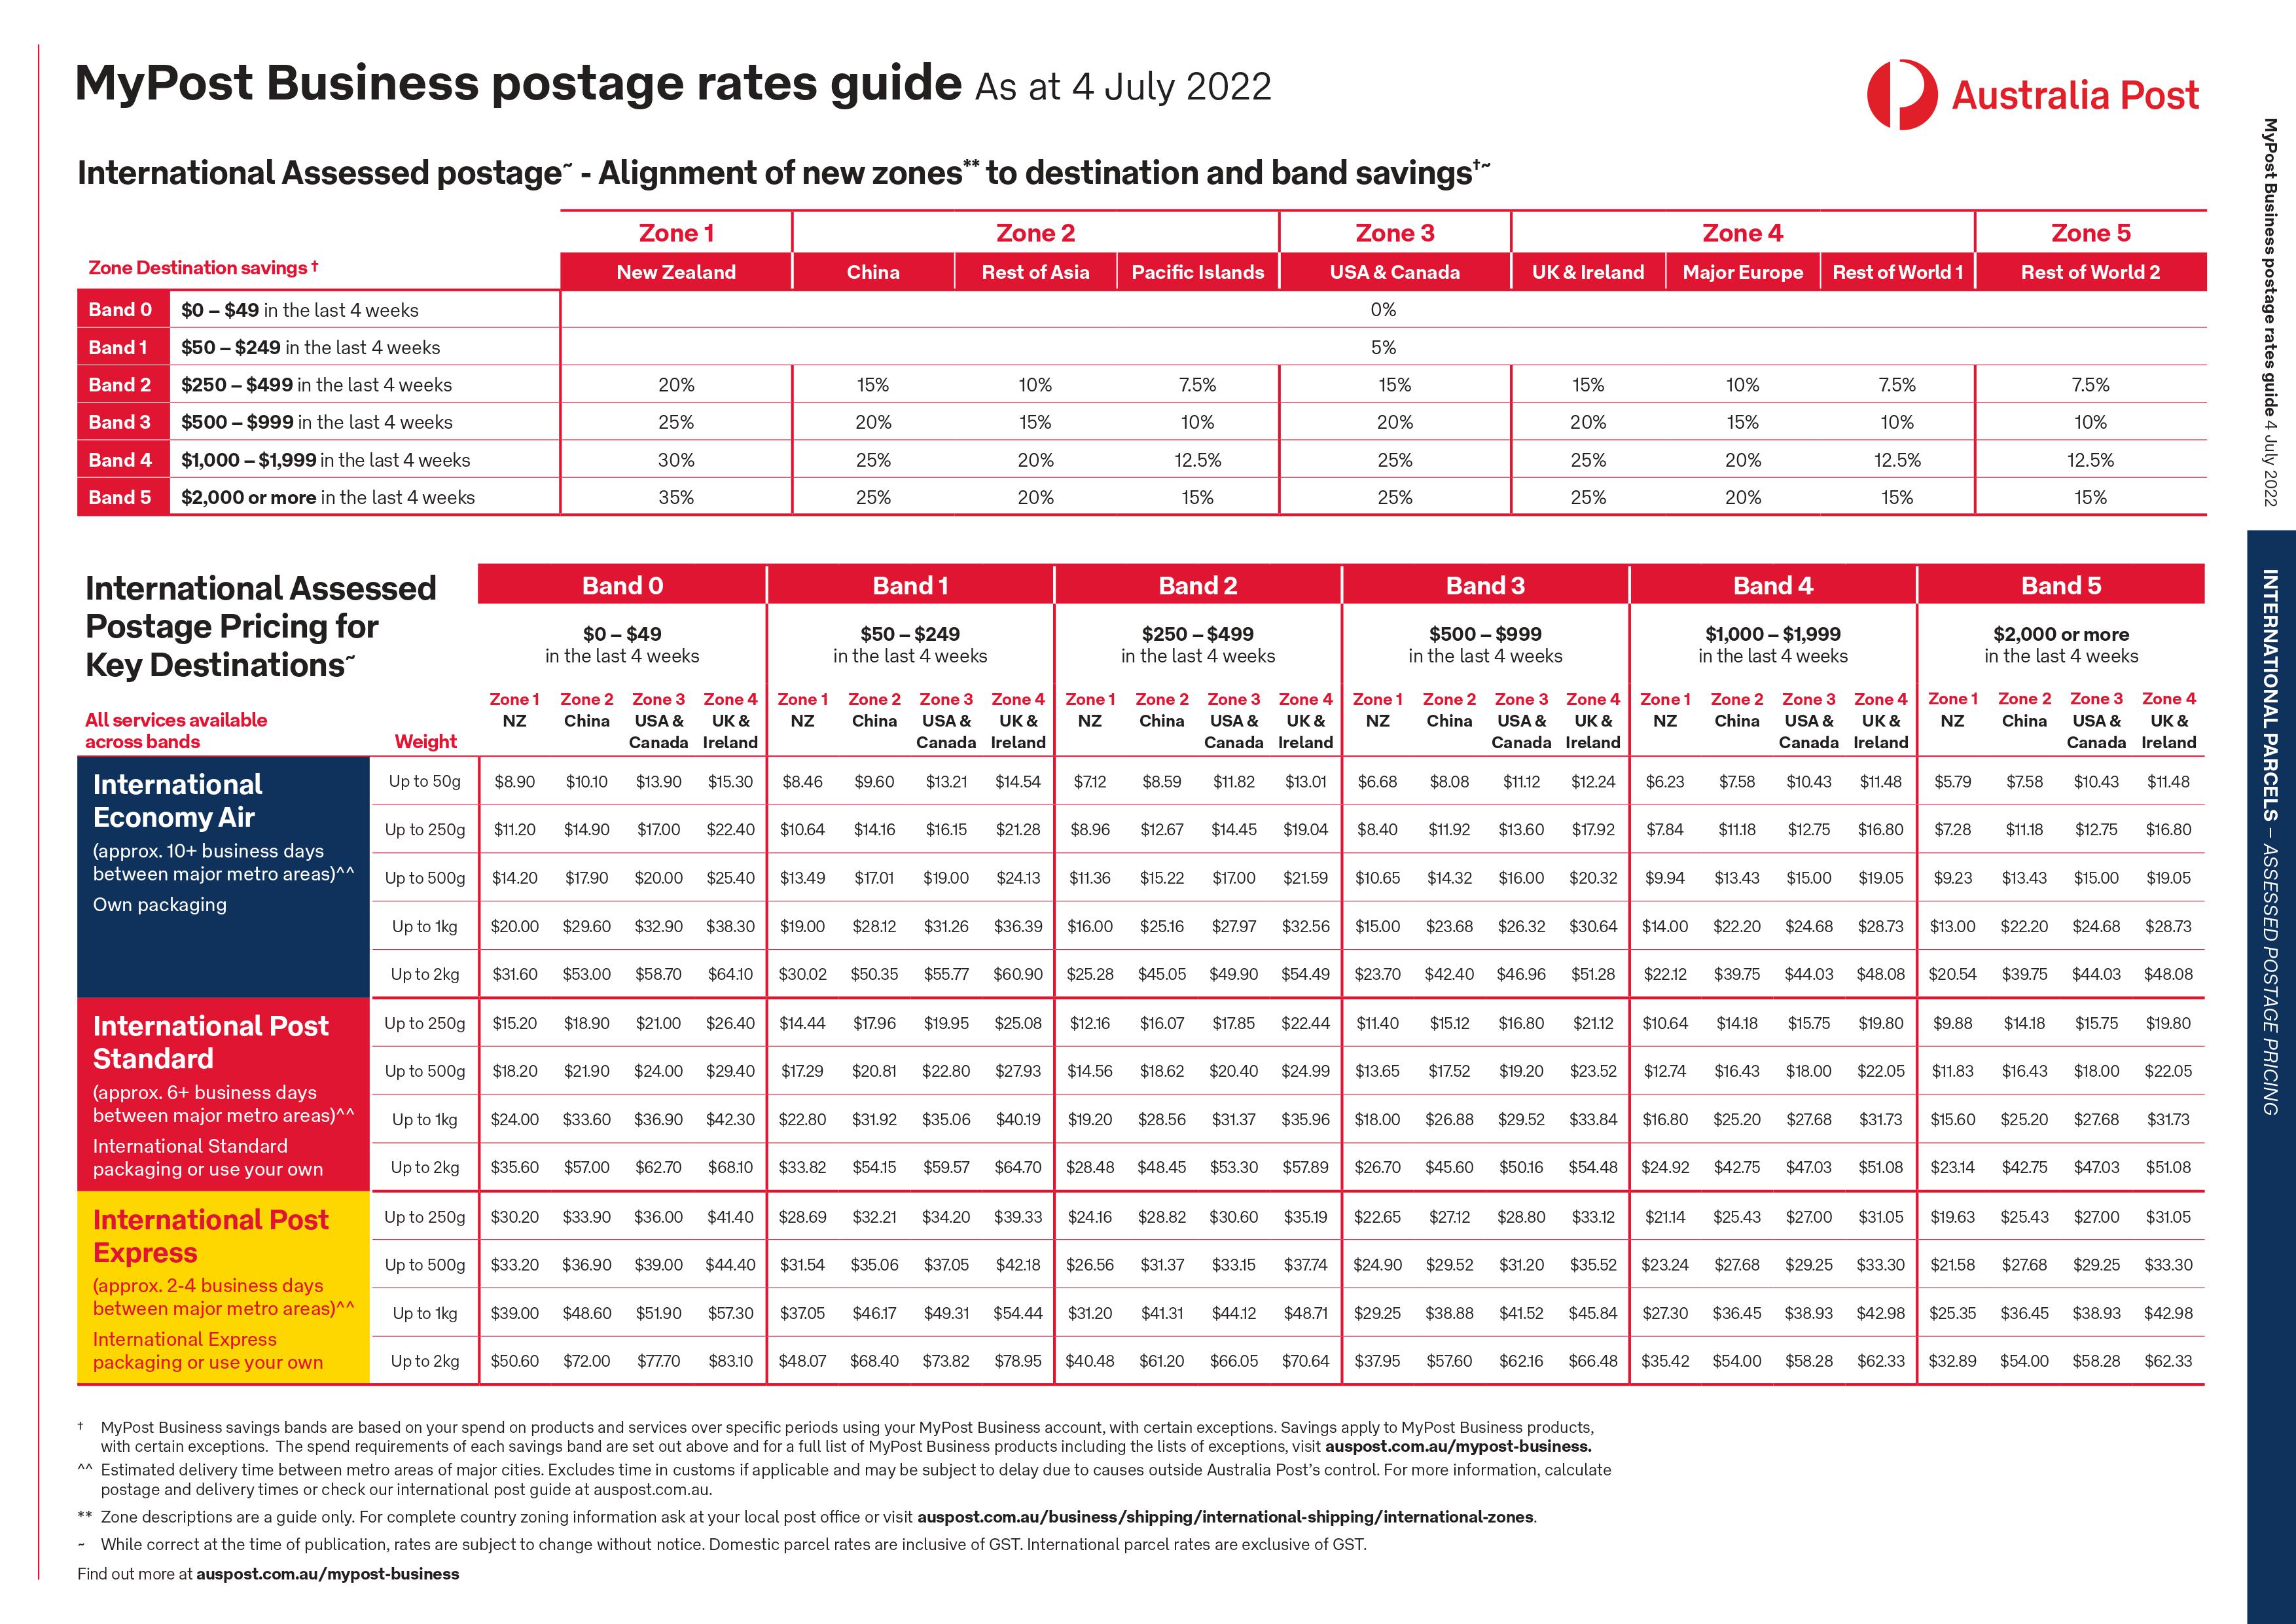 6 Things You Must Know About Australia Post MyPost Business